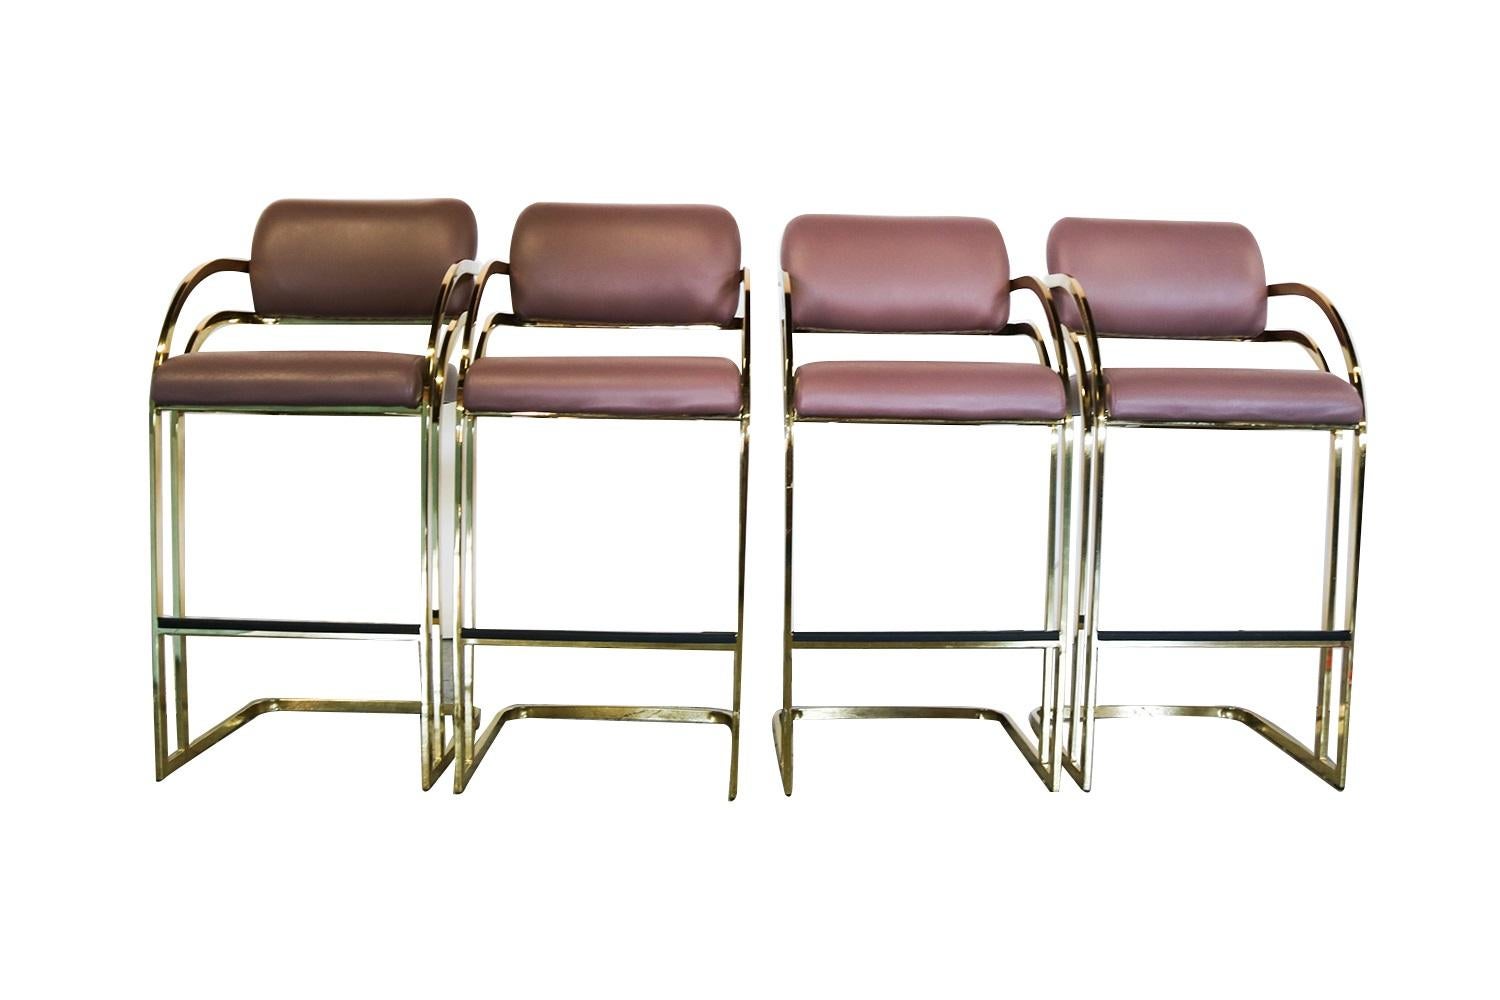 Stunning attractive set of four, brass Cantilever, tall, bar stools by Arthur Umanoff for Contemporary Shells. Features a beautiful, midcentury form, sophisticated and elegant with soft padded back over sculptural cantilevered “curved shape” double